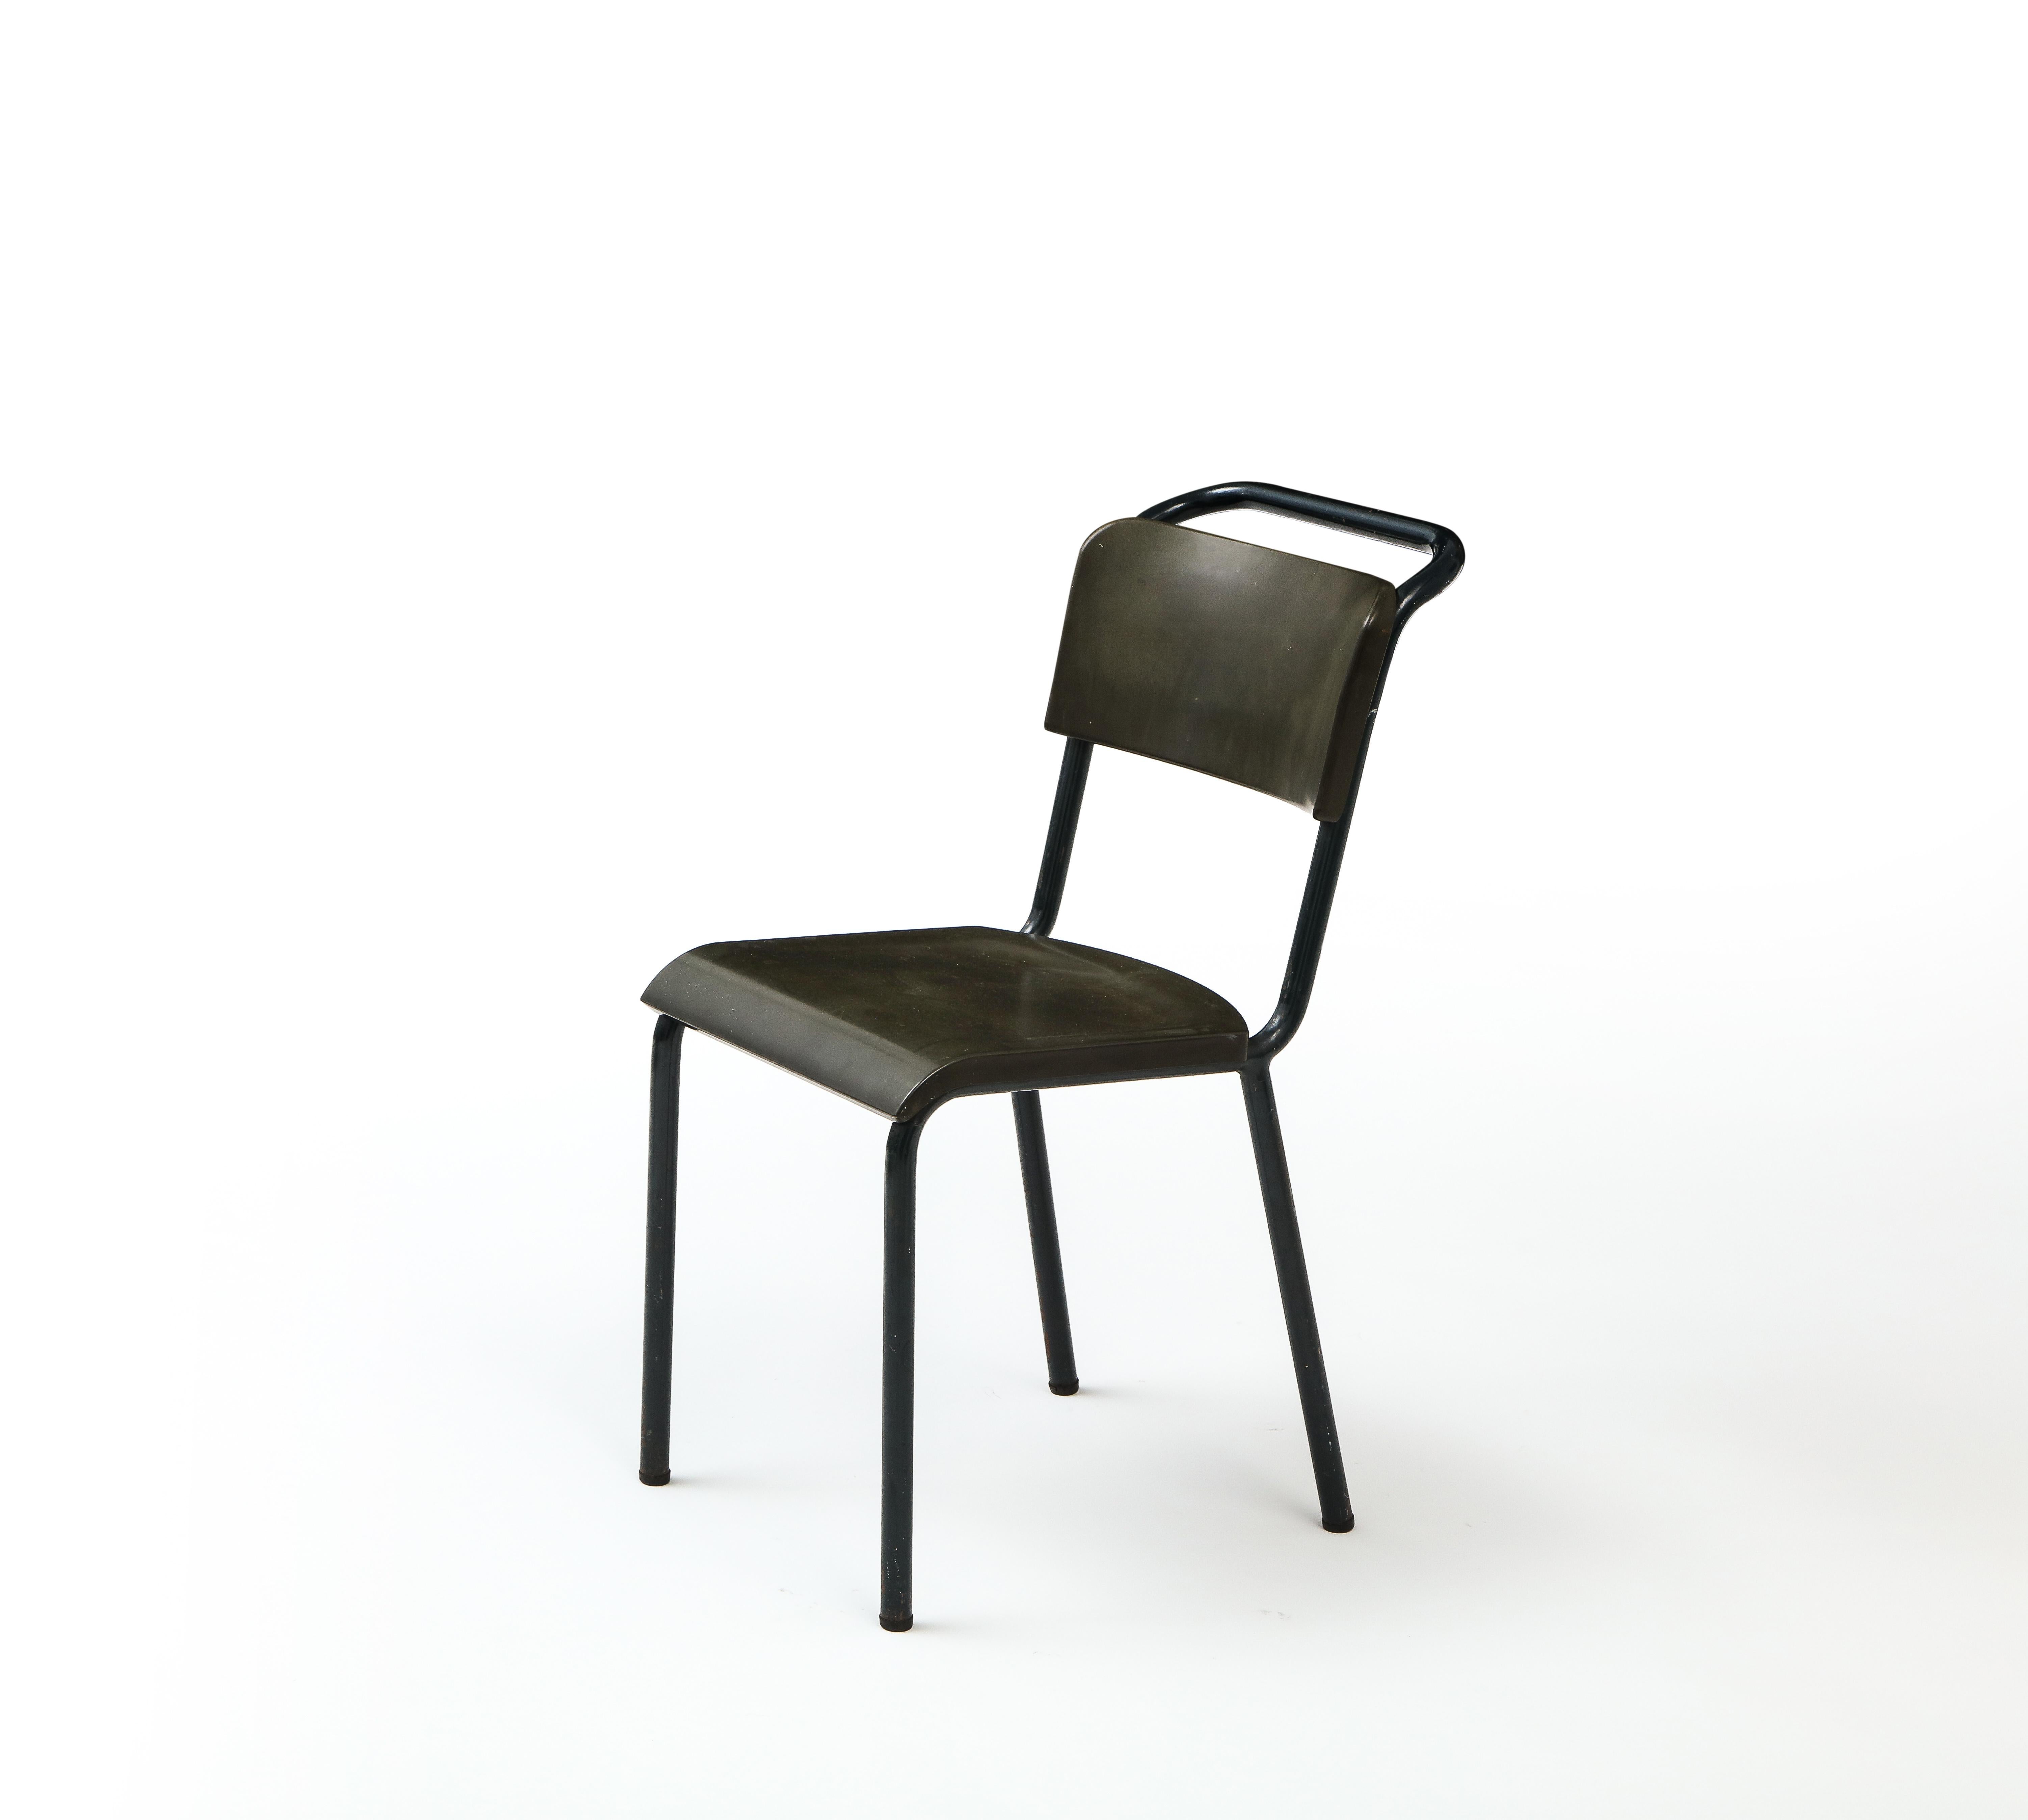 Single Industrial Side Chair in Style of Pierre Guariche, France 1950's For Sale 10